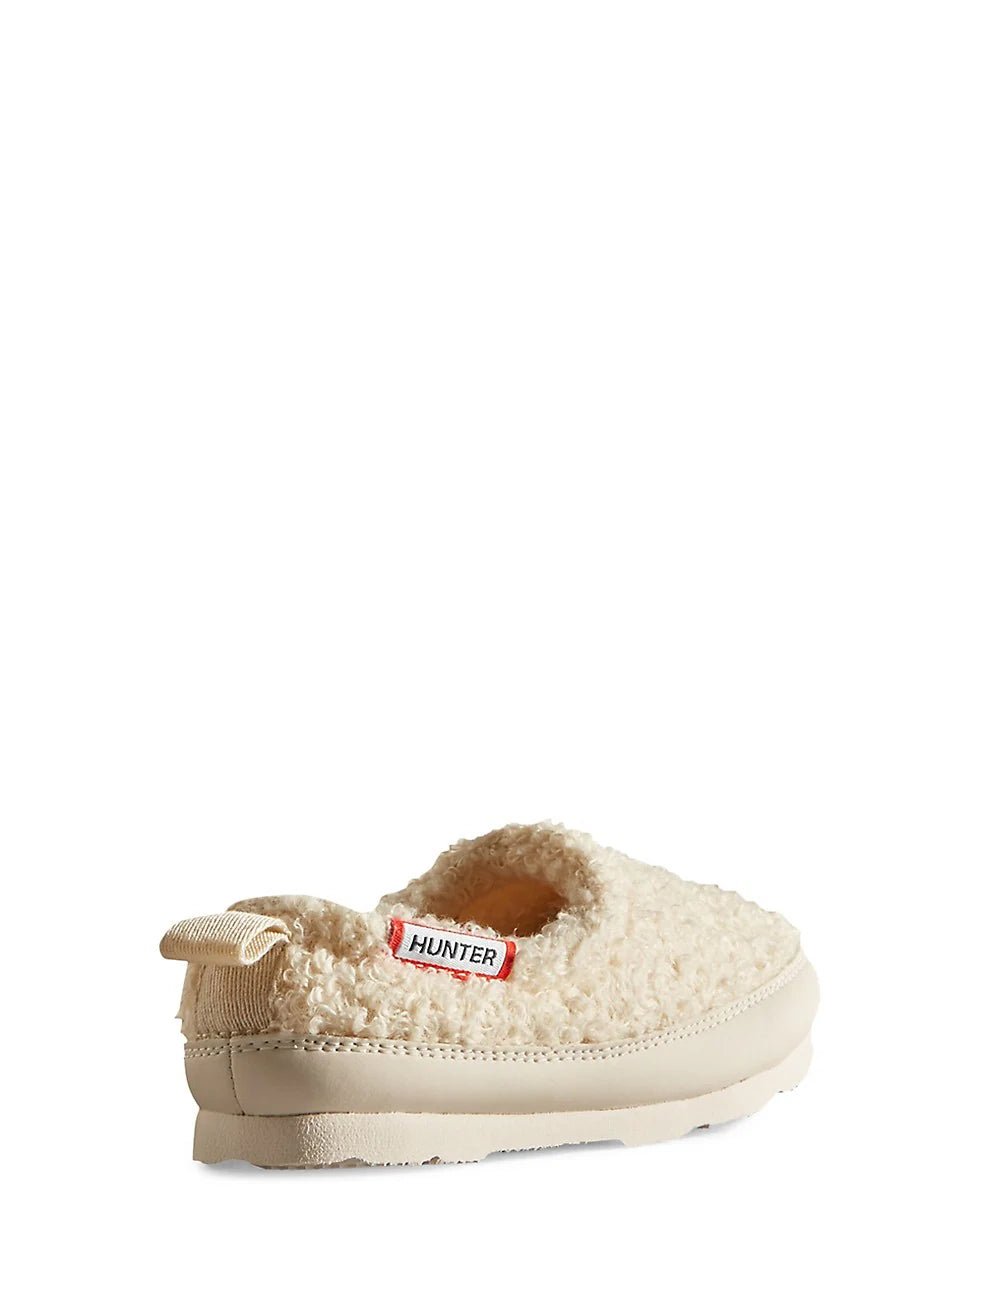 Hunter Little Kids In/Out Cozy Slippers - Mountain Kids Outfitters: White Willow Color - White Background back view